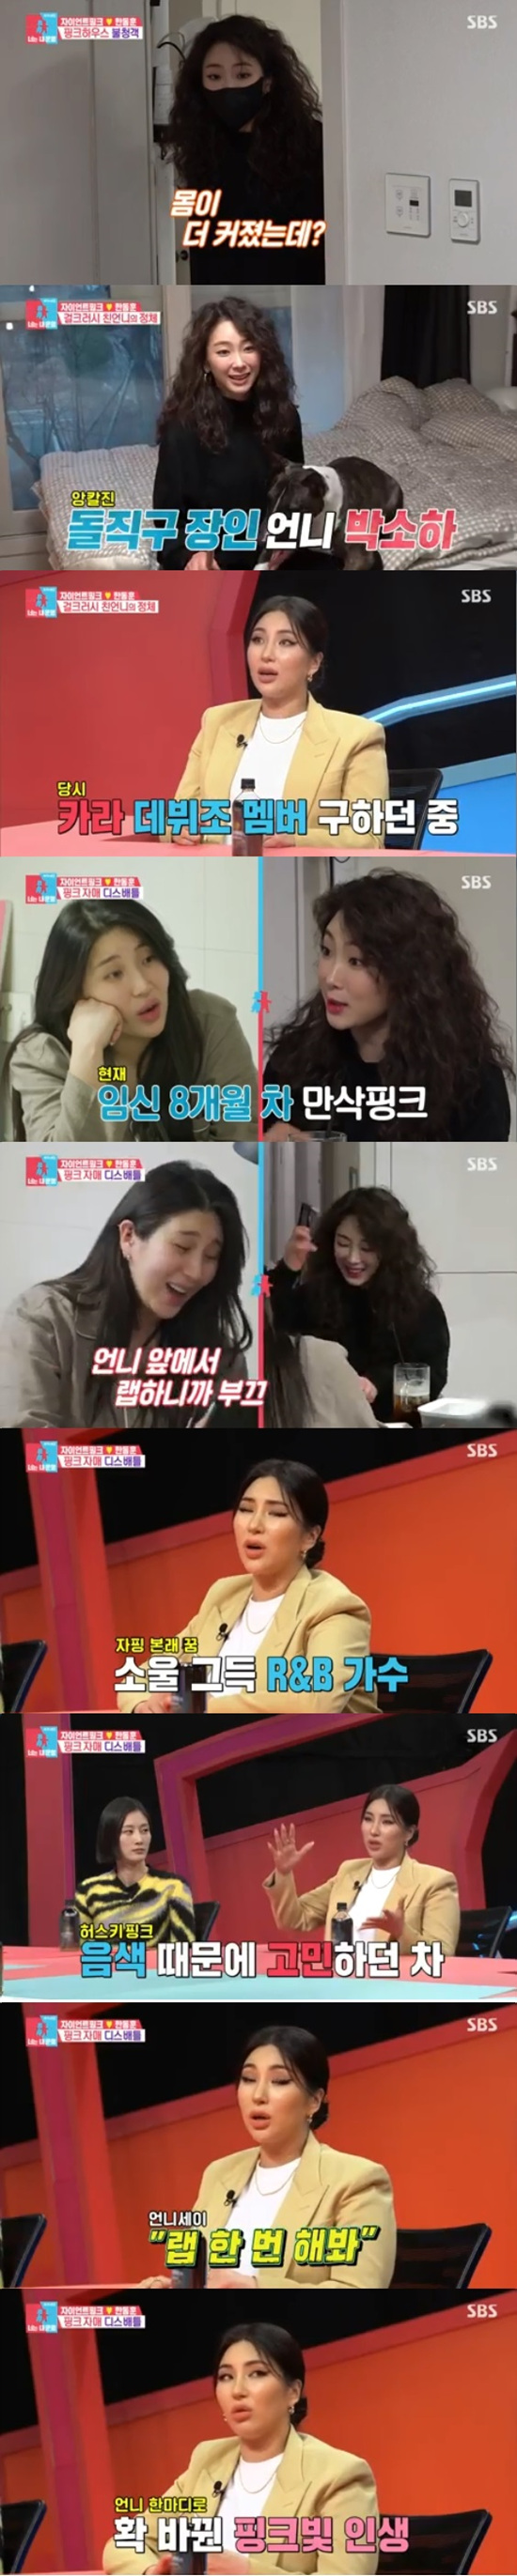 Giant Pink has unveiled her own sister, who has opened the rappers path.On February 28, SBS Same Bed, Different Dreams 22 - You Are My Destiny, Giant Pink revealed her sister Park Soha and attracted attention.On the day of Giant Pinks sleep, someone pressed the password and called the name of the puppy, and naturally moved to wonder.Park So-ha looked at Giant Pink as she straightened up in her bed and said, Im bigger. Bigger. Severe. Giant Pink said it looked like this.In the studio, Park So-ha took off his mask and began to get drunk with an actress-like visual. Lee Hyun-yi said, Its pretty as soon as he checked Parks face.Kim Sook also said, I think it was popular. My family thought my sister would make her entertainer debut.Giant Pink told her sister that she called her Tidal Wave, and told her that she almost made her debut as a girl group KARA.When Park So-ha was in college, he was looking for a pretty person at a company that was trying to make KARA, but he was not good at dancing and singing,Giant Pink said that her sister had expressed her regrets after KARA was good.Giant Pink told her sister, I have something to do today. She told her own wrap for pink.Giant Pink said, I am ashamed because I am in front of my sister. It was fun when I was alone. I point out my sister again.My sister usually points out Giant Pinks rap without hesitation.Park So-ha said, I made my debut because of him. I keep hiding from your house, practicing and not listening.Giant Pink accepted her sisters words, but she poured out words that she pointed out, Do not burn like that, Do not write that lyrics, and Do not use dialect.Giantpink said: I originally sang - it wasnt a husky-like style at the time.I do not have to shout the range and the high sound, so I am in a sense of disgust. My sister told me to rap and how do you know how to become the second Yoon Mi-rae? Photo: SBS broadcast screen